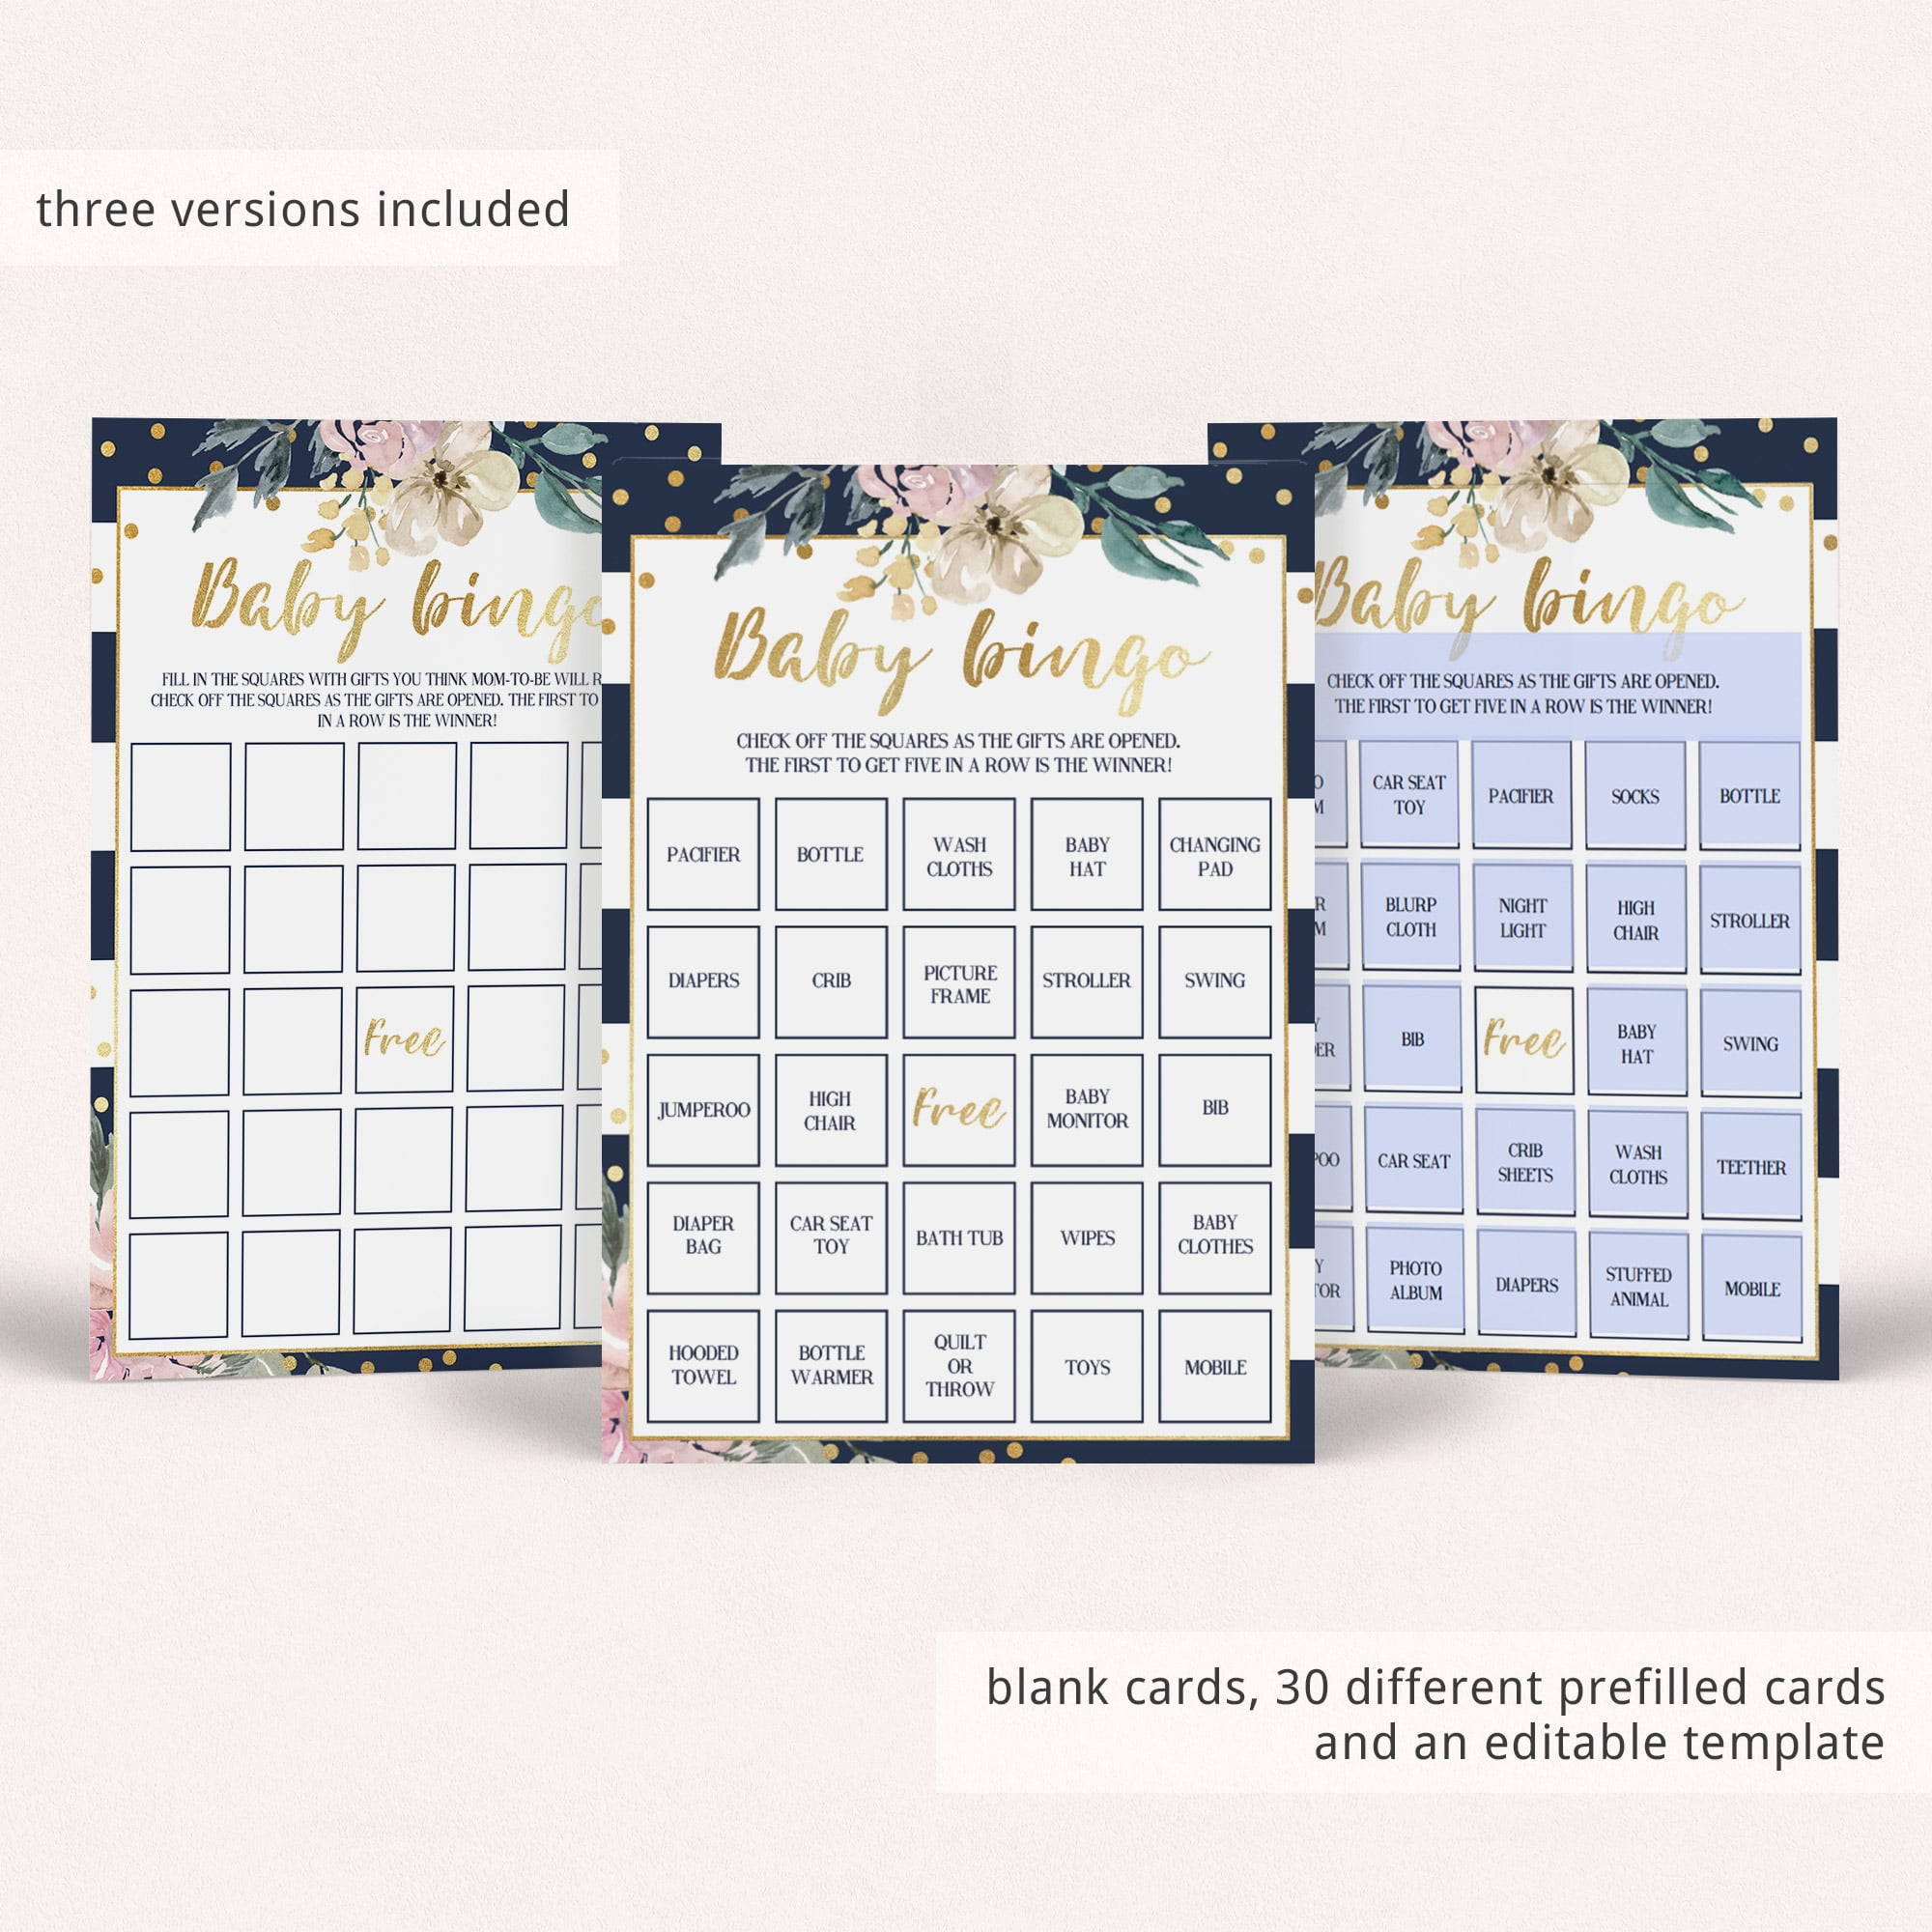 Baby bingo blank cards and prefilled cards printables by LittleSizzle